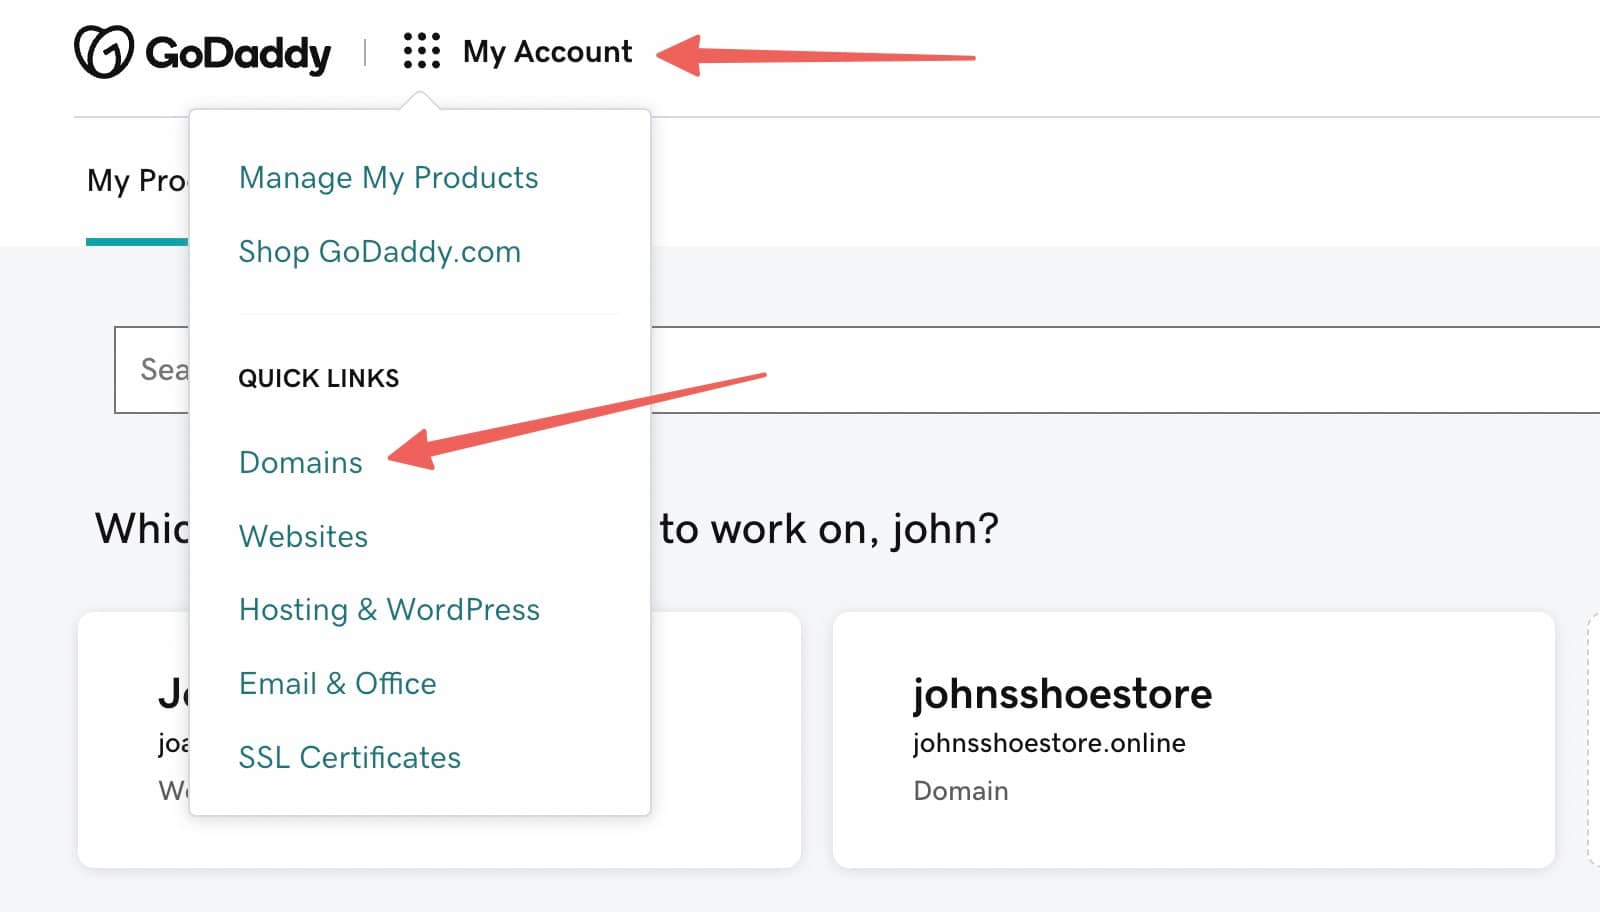 GoDaddy "My Account" menu with a red arrow pointing to "Domains"